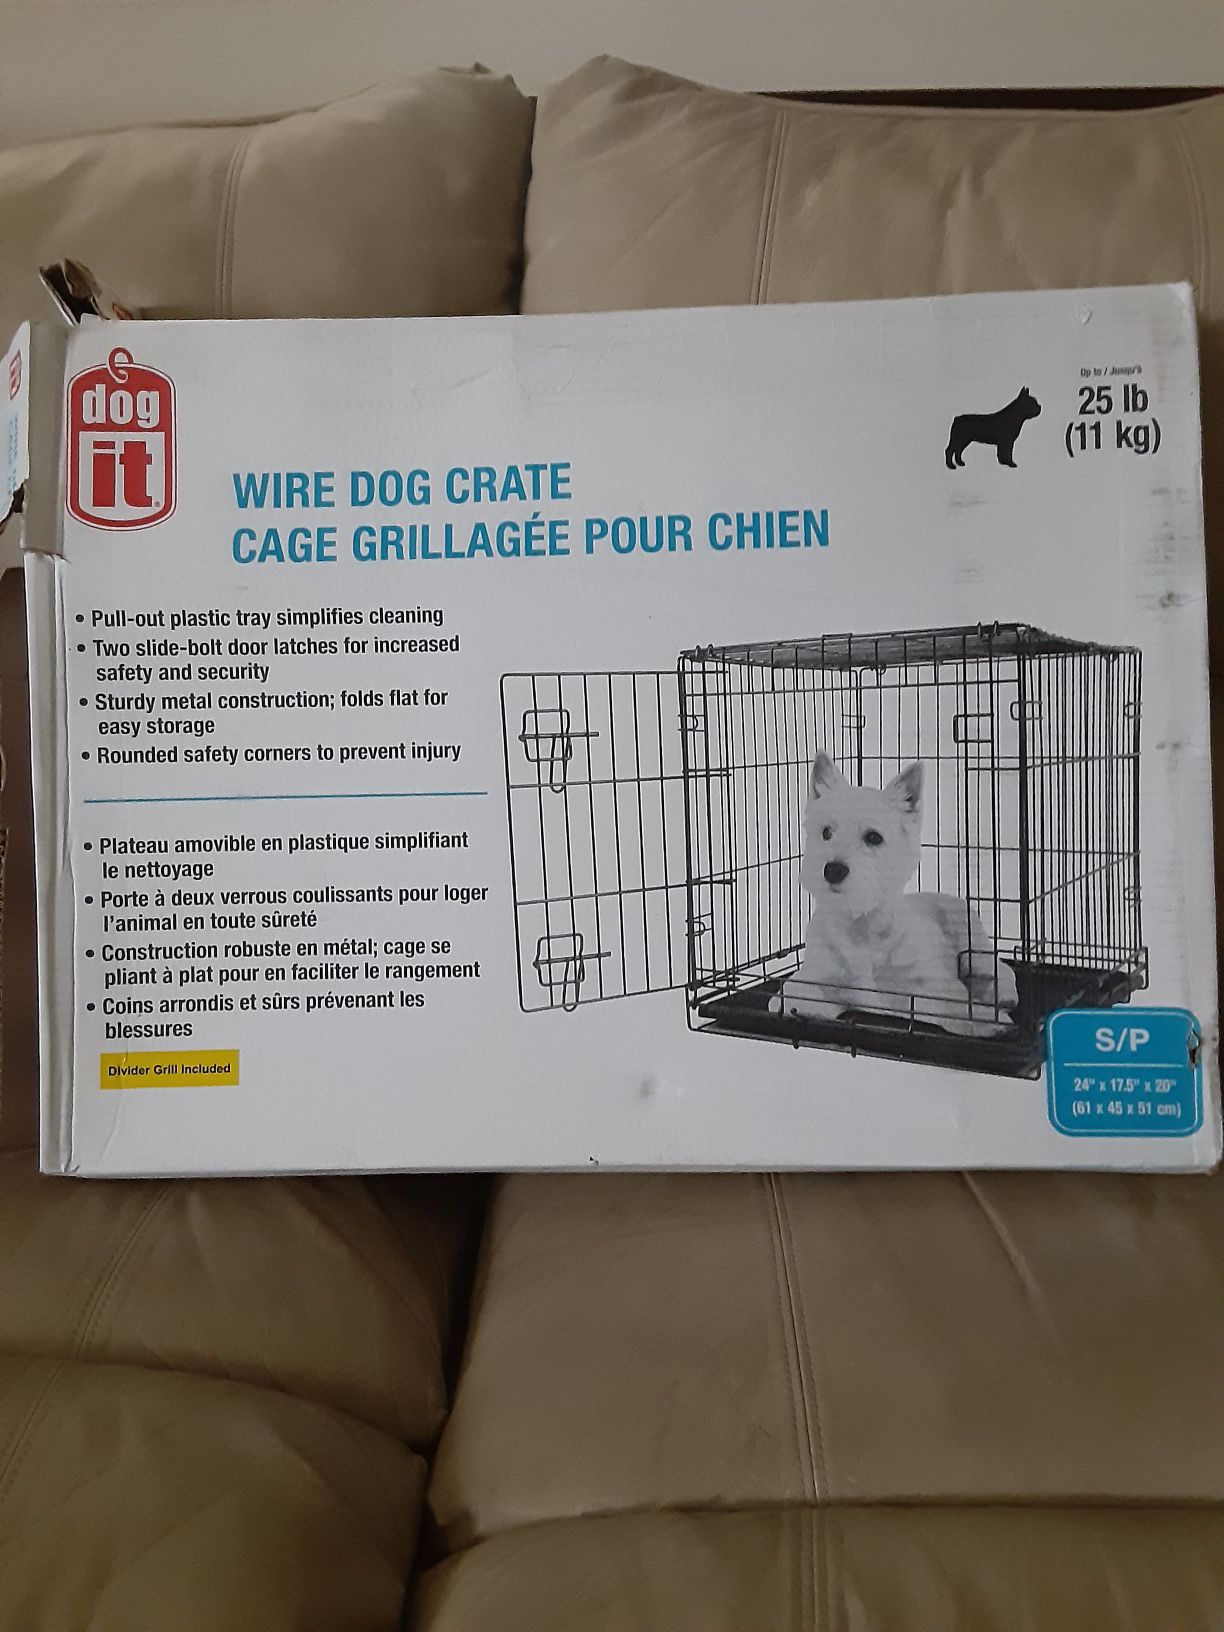 Brand new small dog crate,in box! By dogit